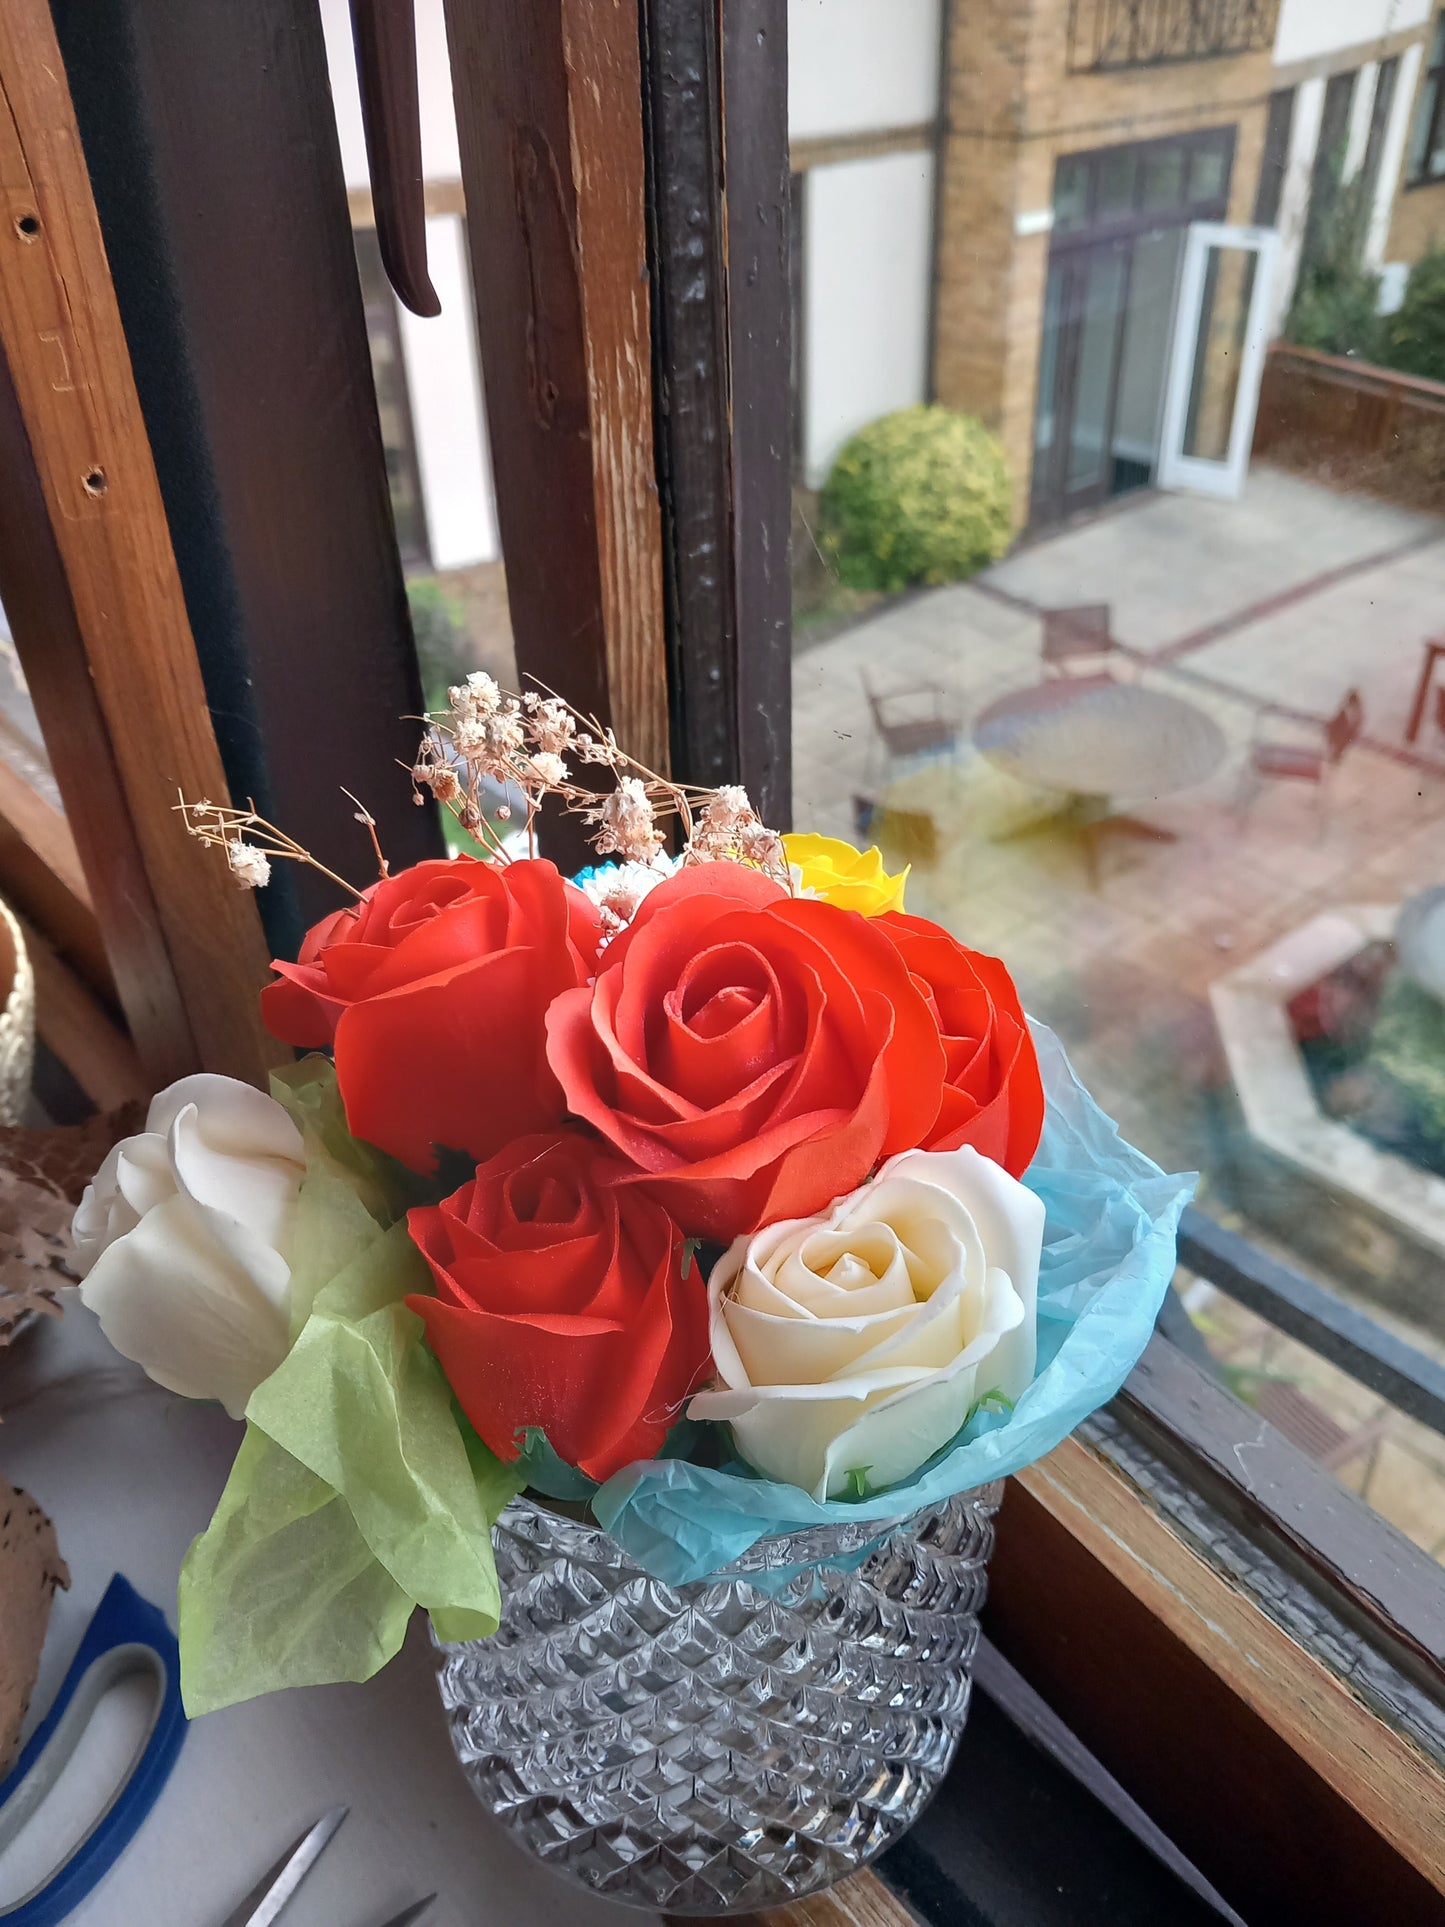 MY COLOUR CARNATIONS MULTI COLOUR FLOWER SOAP MIXED ROSES AND SUNSET ORANGE ROSE IN GLASSWARE